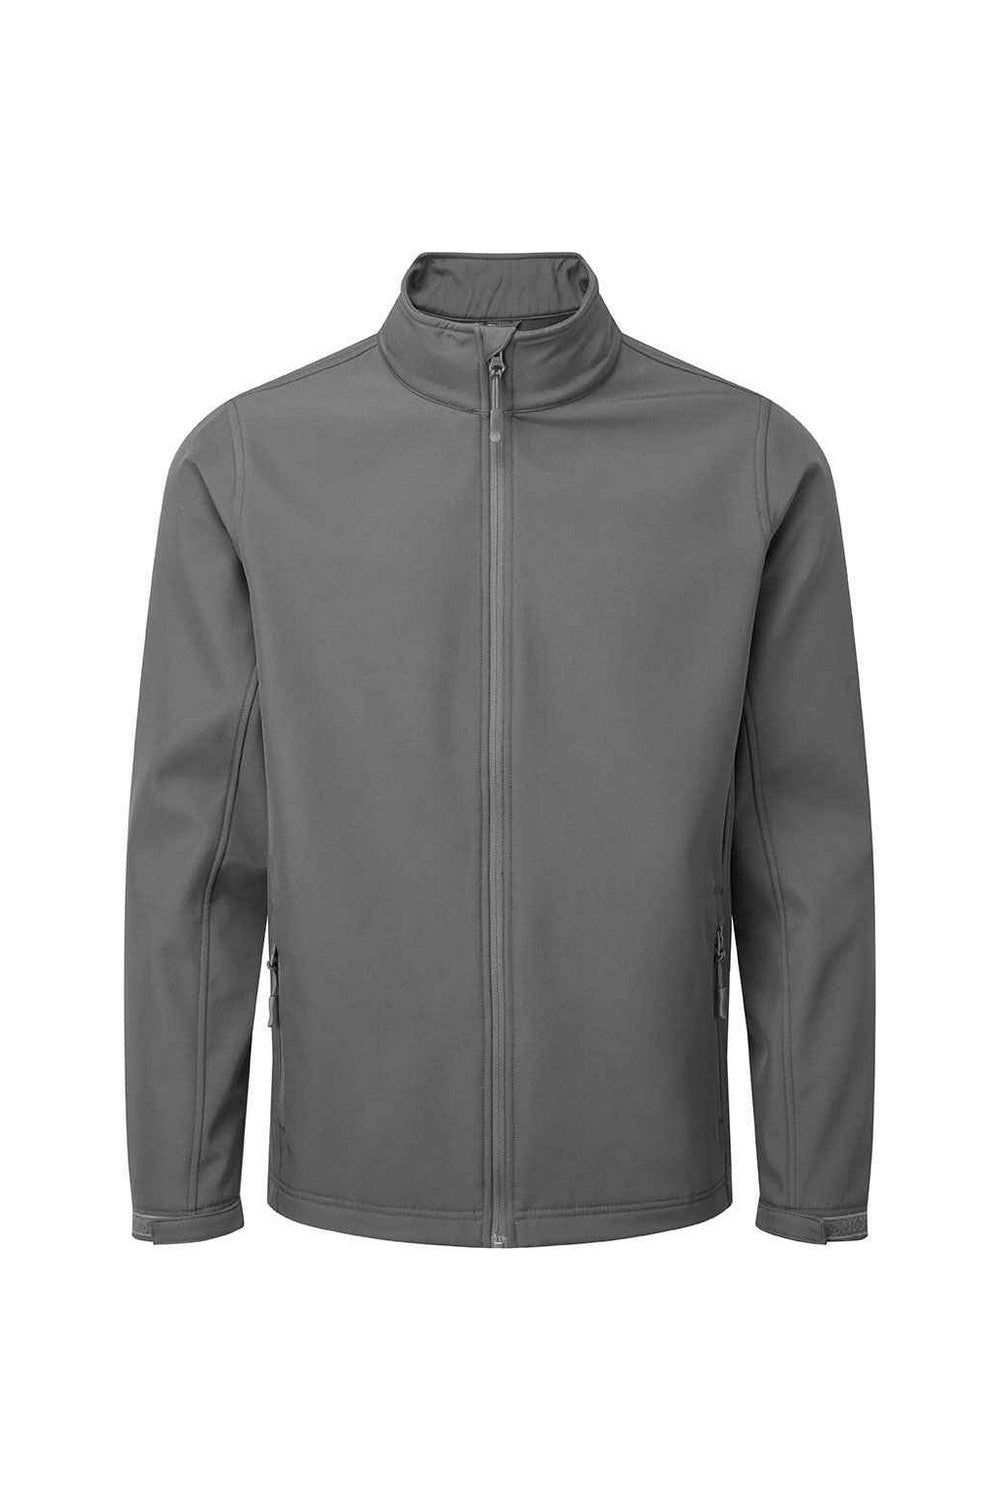 Mens Recycled Wind Resistant Soft Shell Jacket - Dark Grey